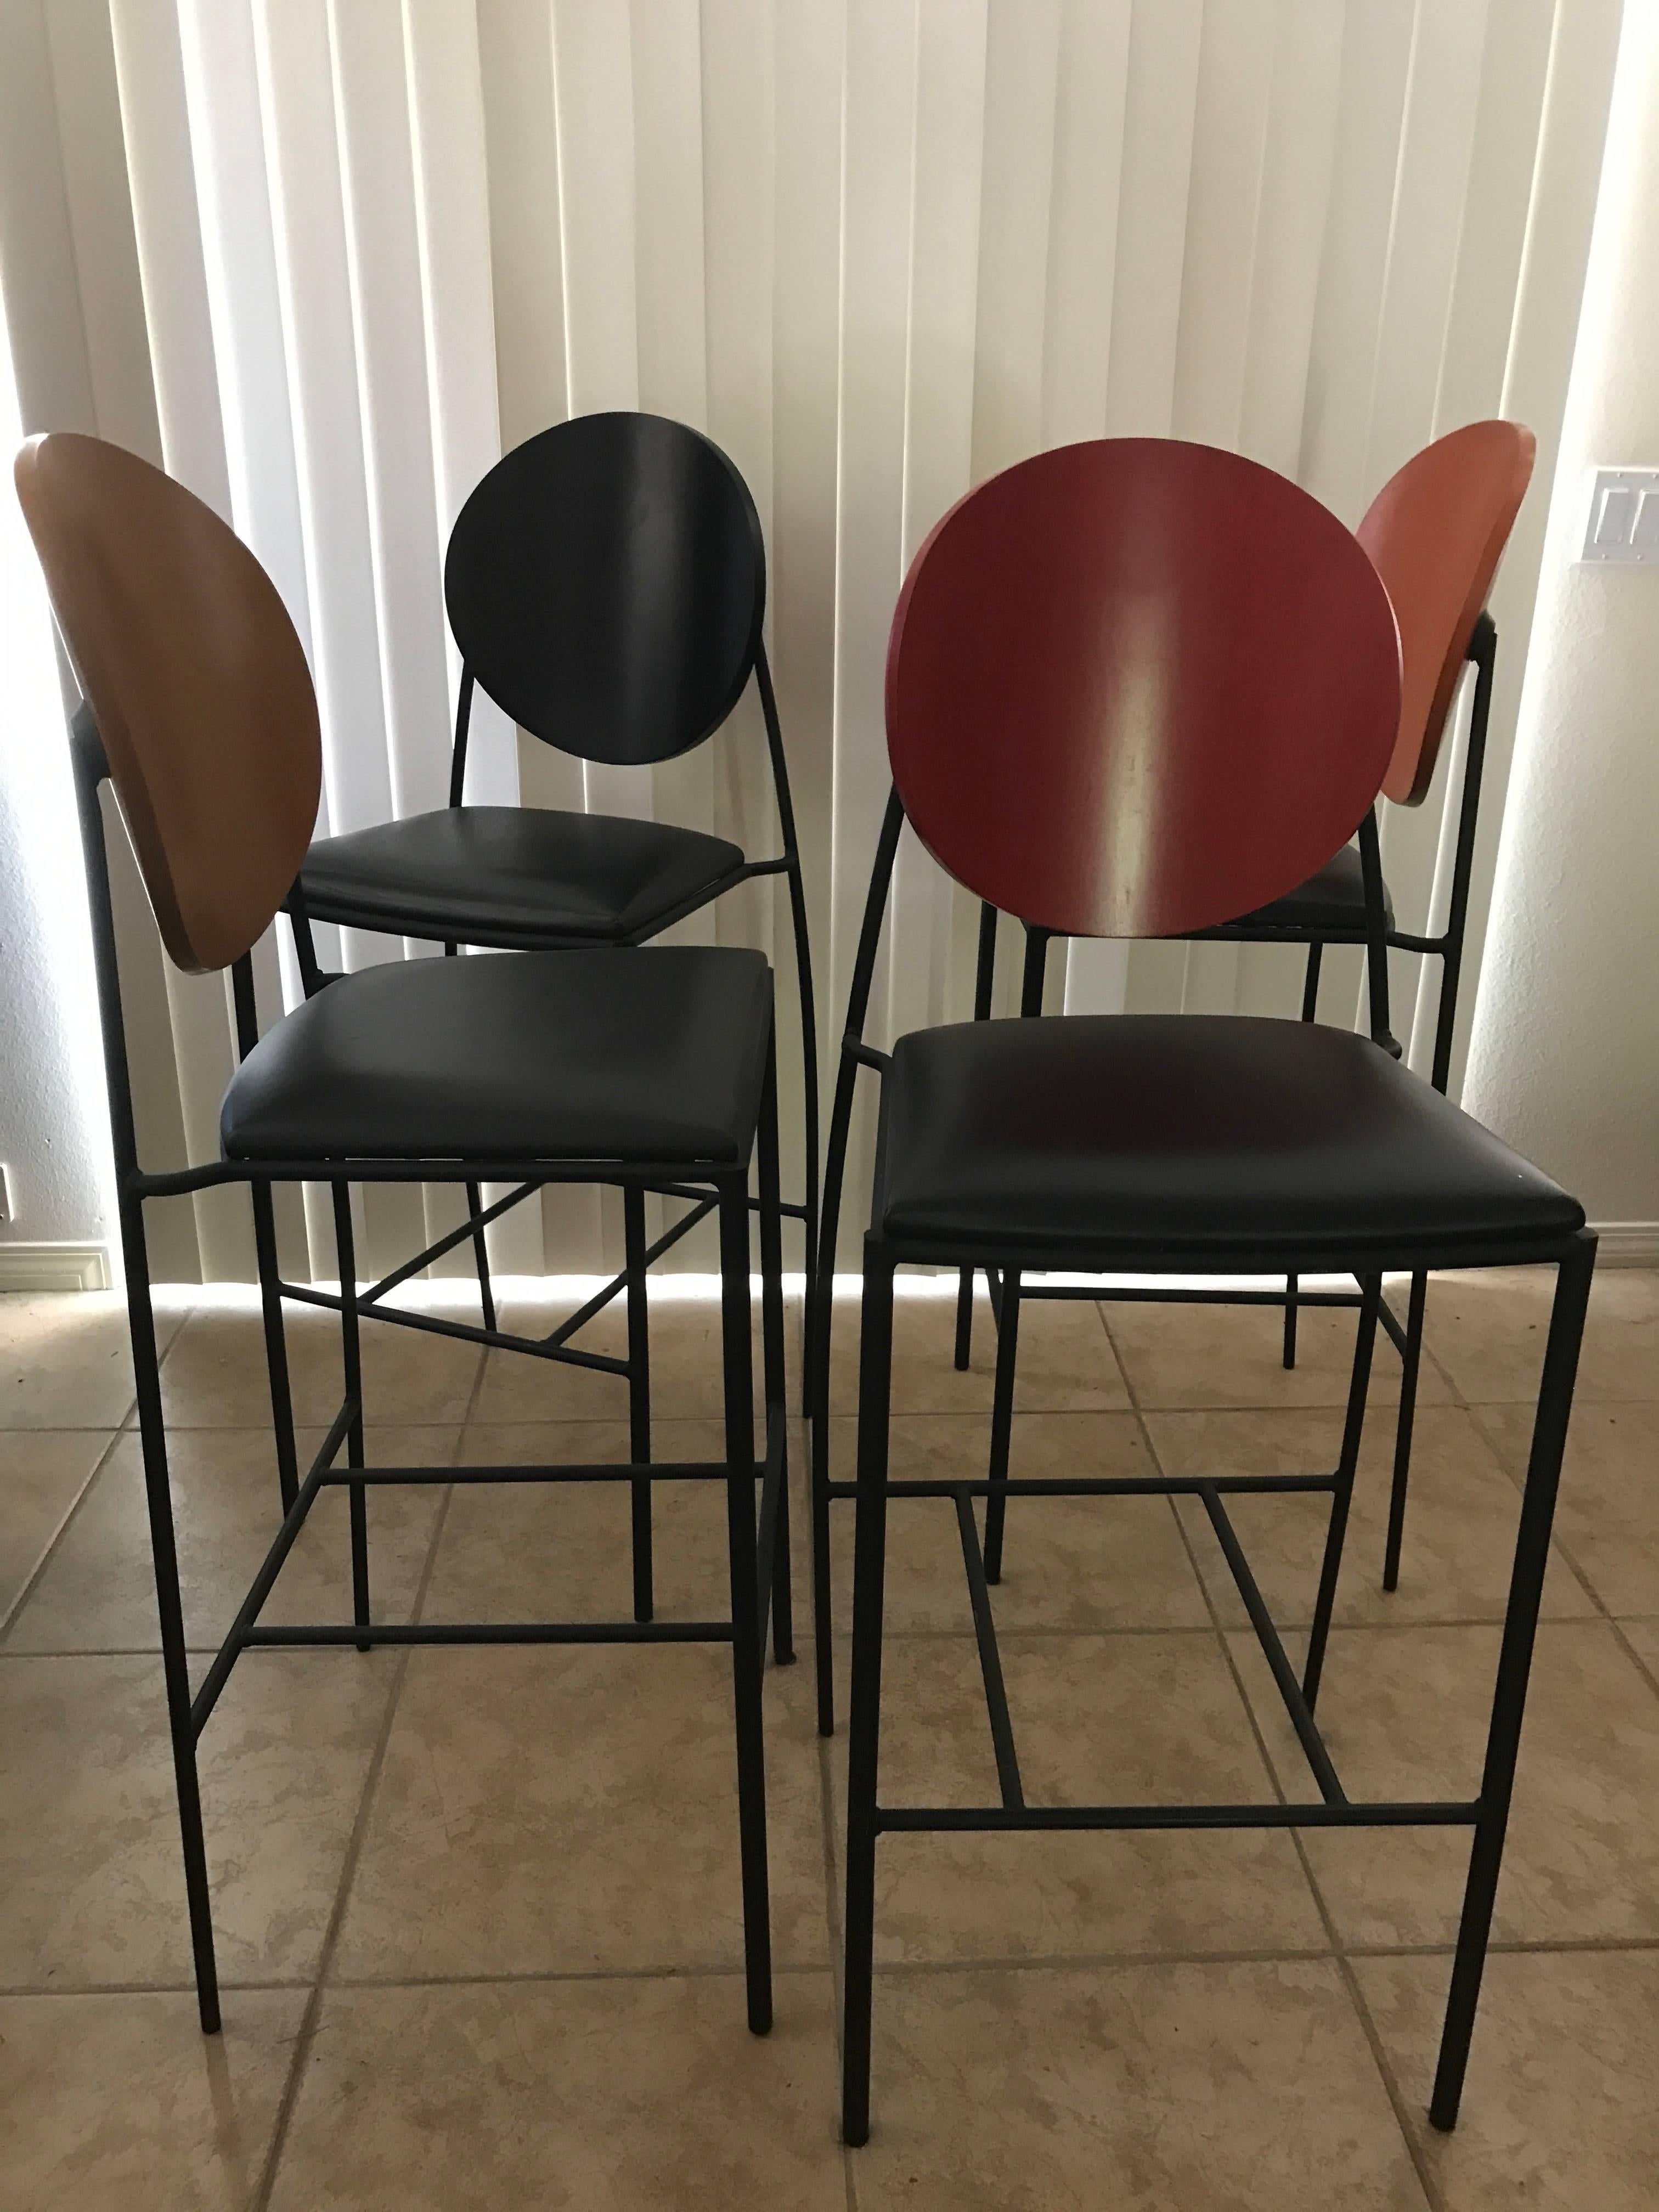 This amazing set of four barstools came from a multi million dollar Palm Springs estate. This Vik-Tor 2 design has been discontinued from the Dakota Jackson line and are no longer available. This unique set of four stools were special ordered in the